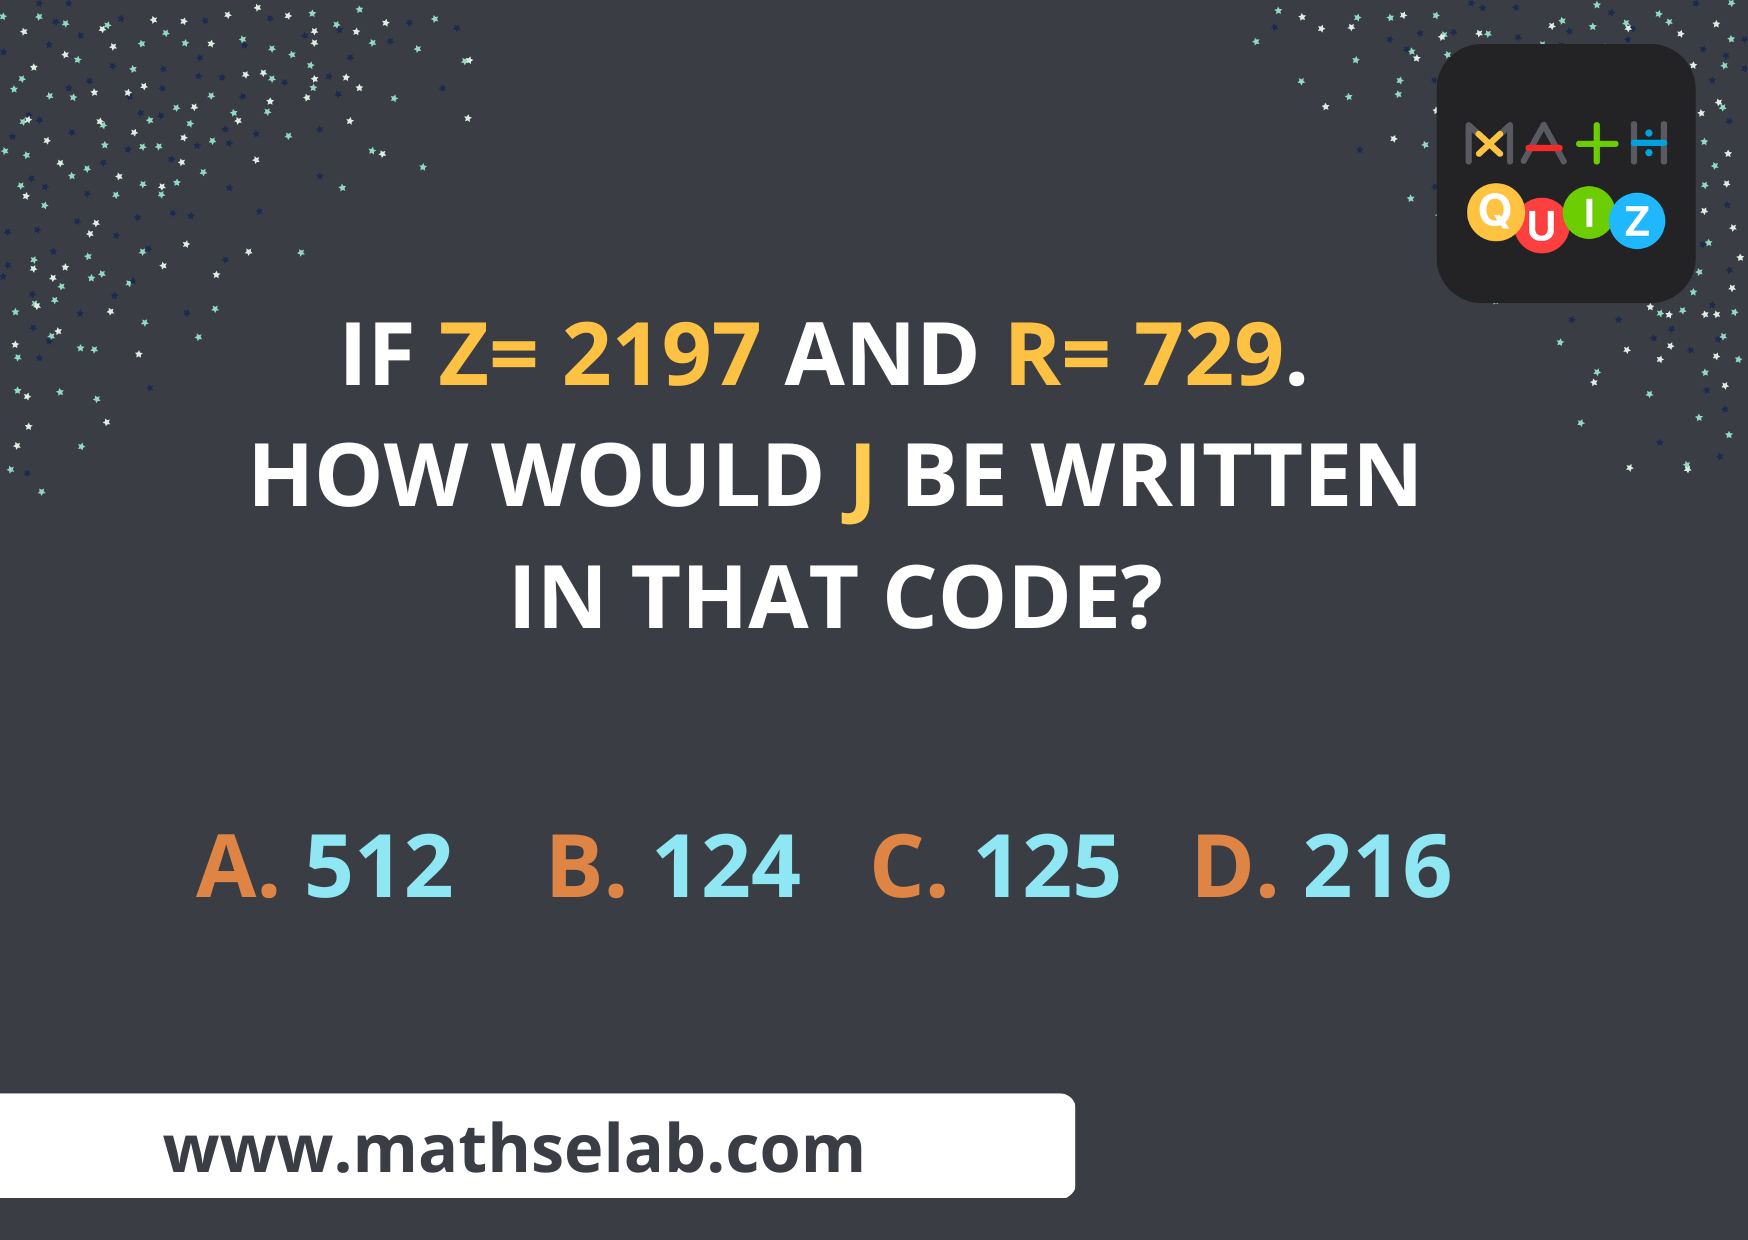 If Z= 2197 and R= 729. How would J be written in that code - www.mathselab.com